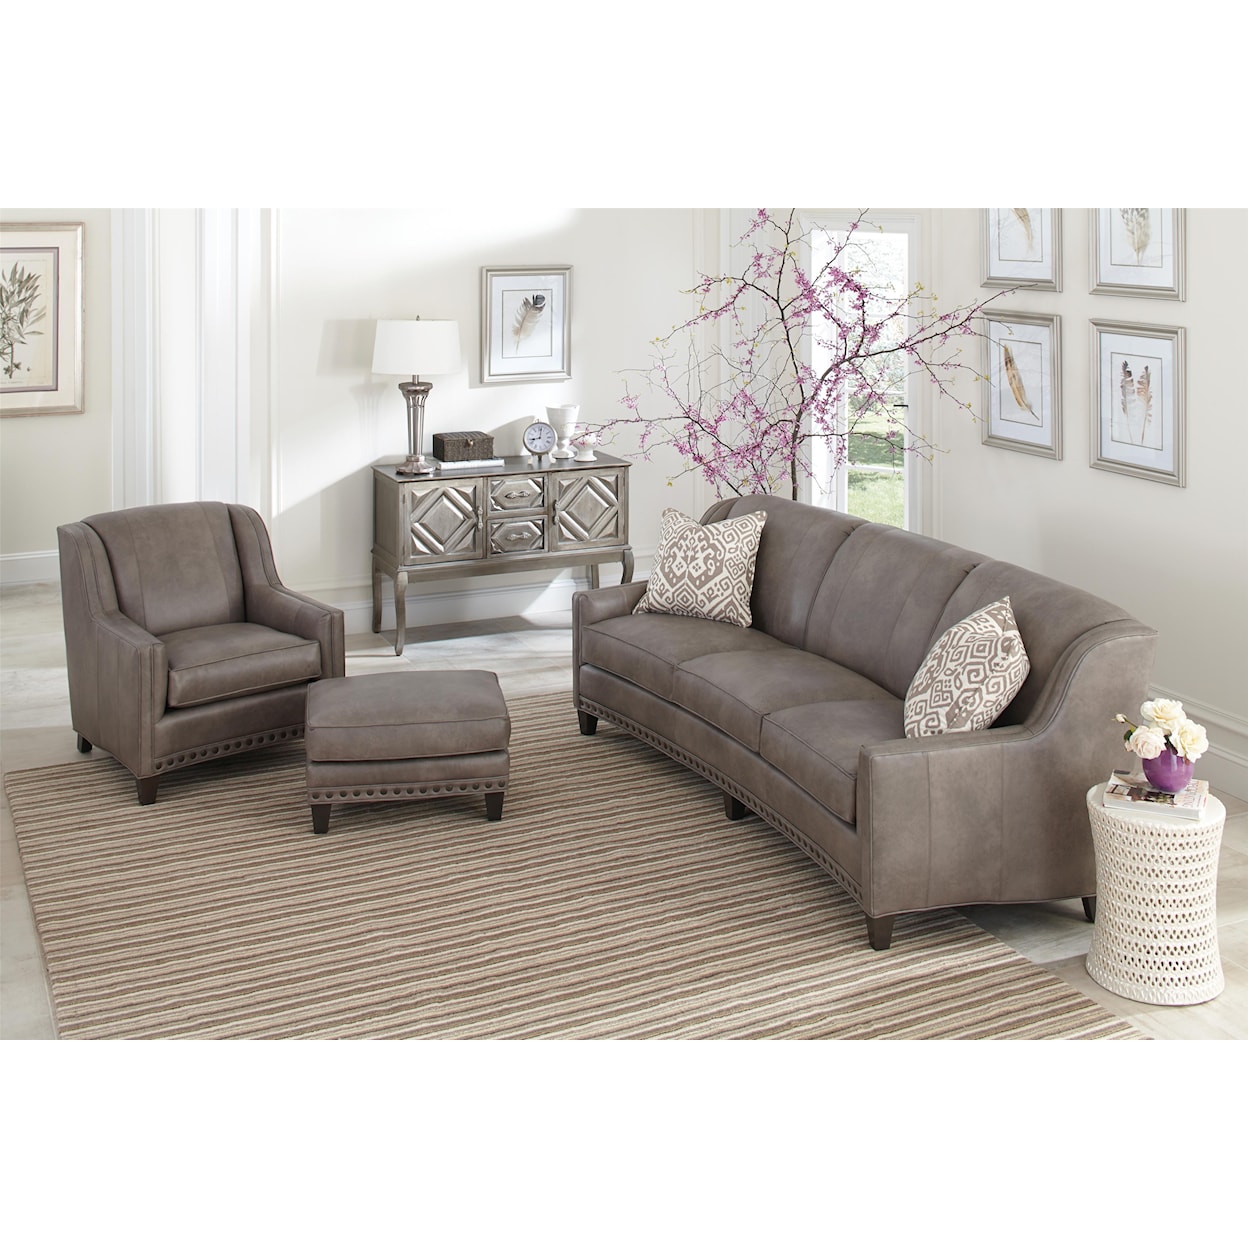 Smith Brothers 227 Stationary Living Room Group